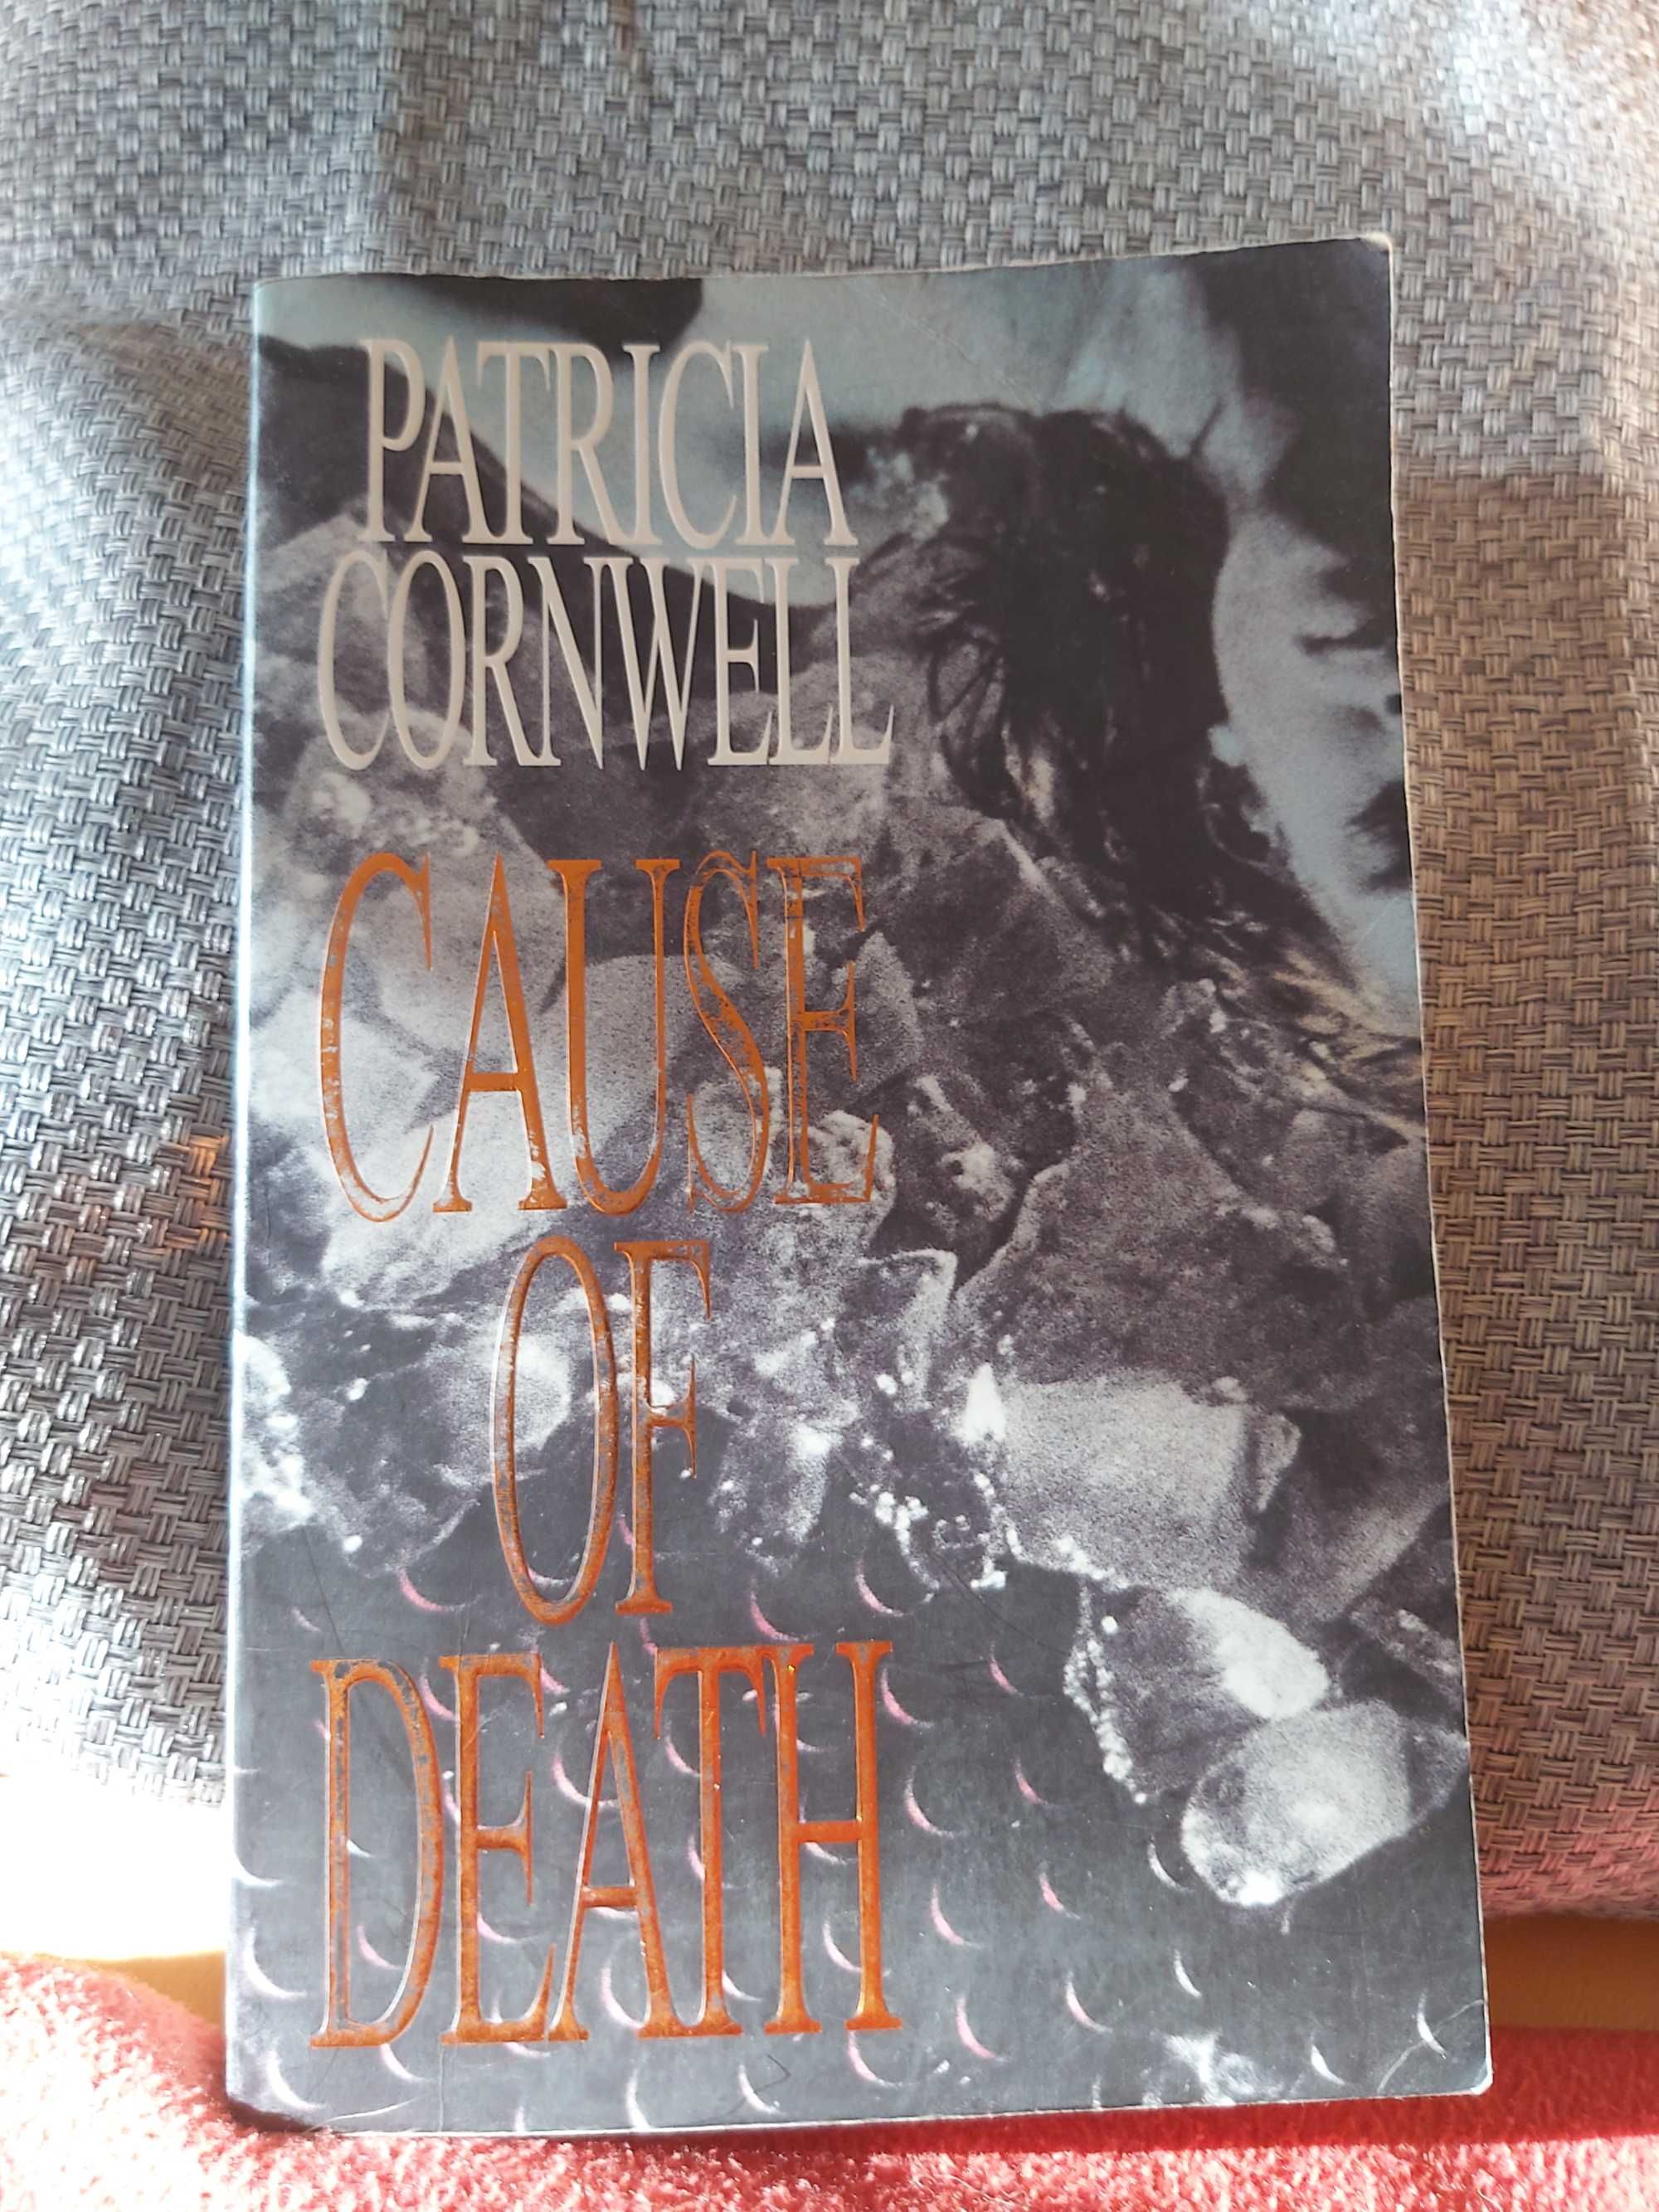 Patricia Cornwell Cause of death